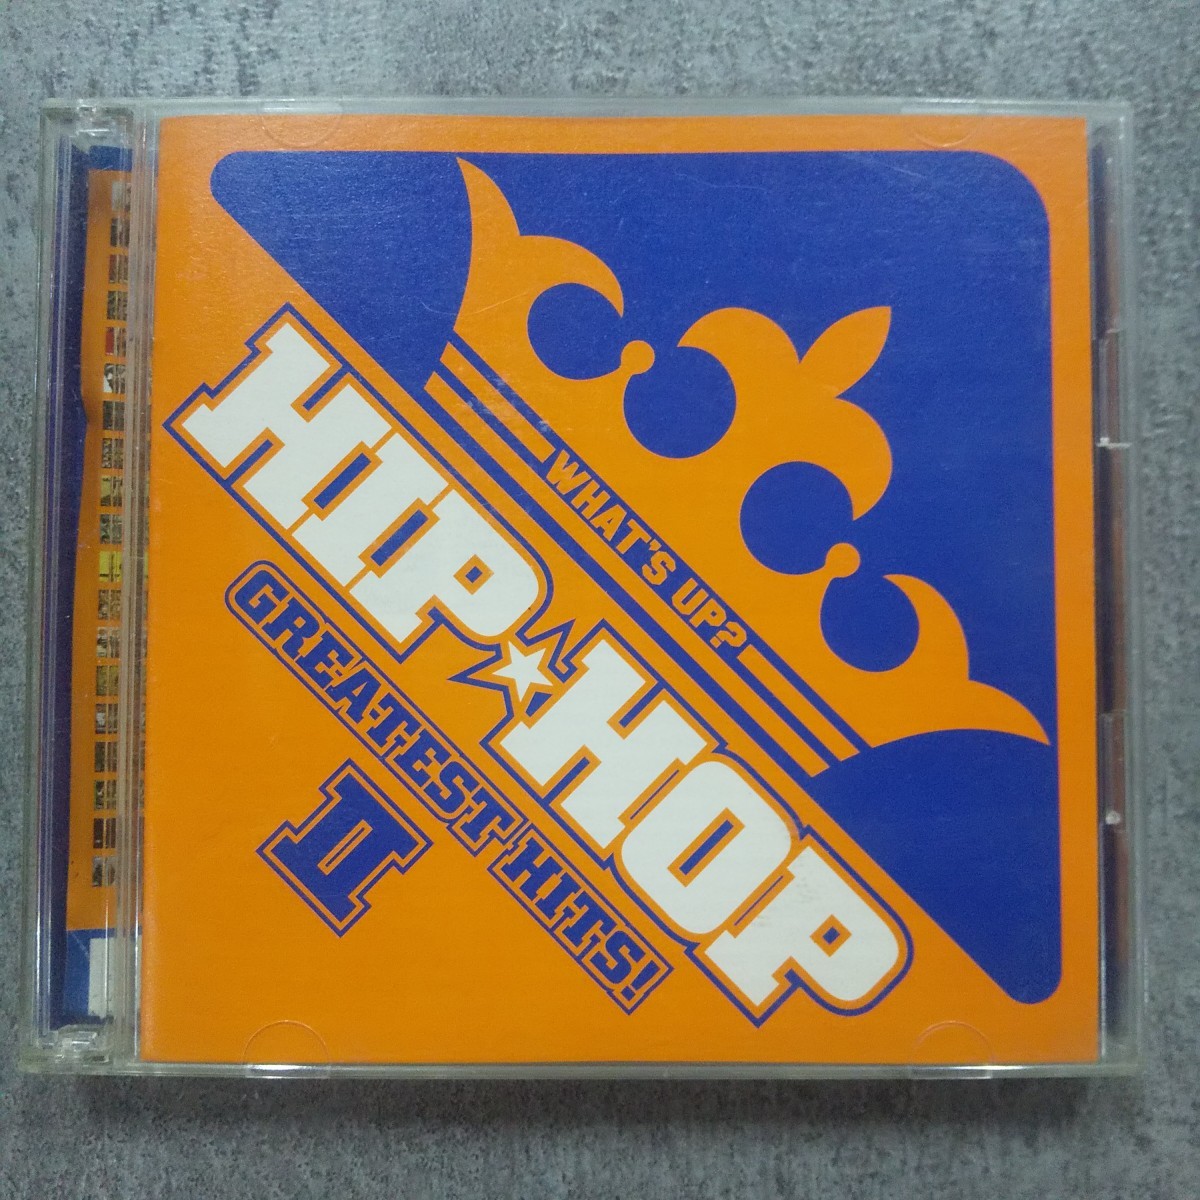 DSC-464 WHAT's UP? HIP☆HOP GREATEST HITS! Ⅱ 帯付き CD２枚組_画像1